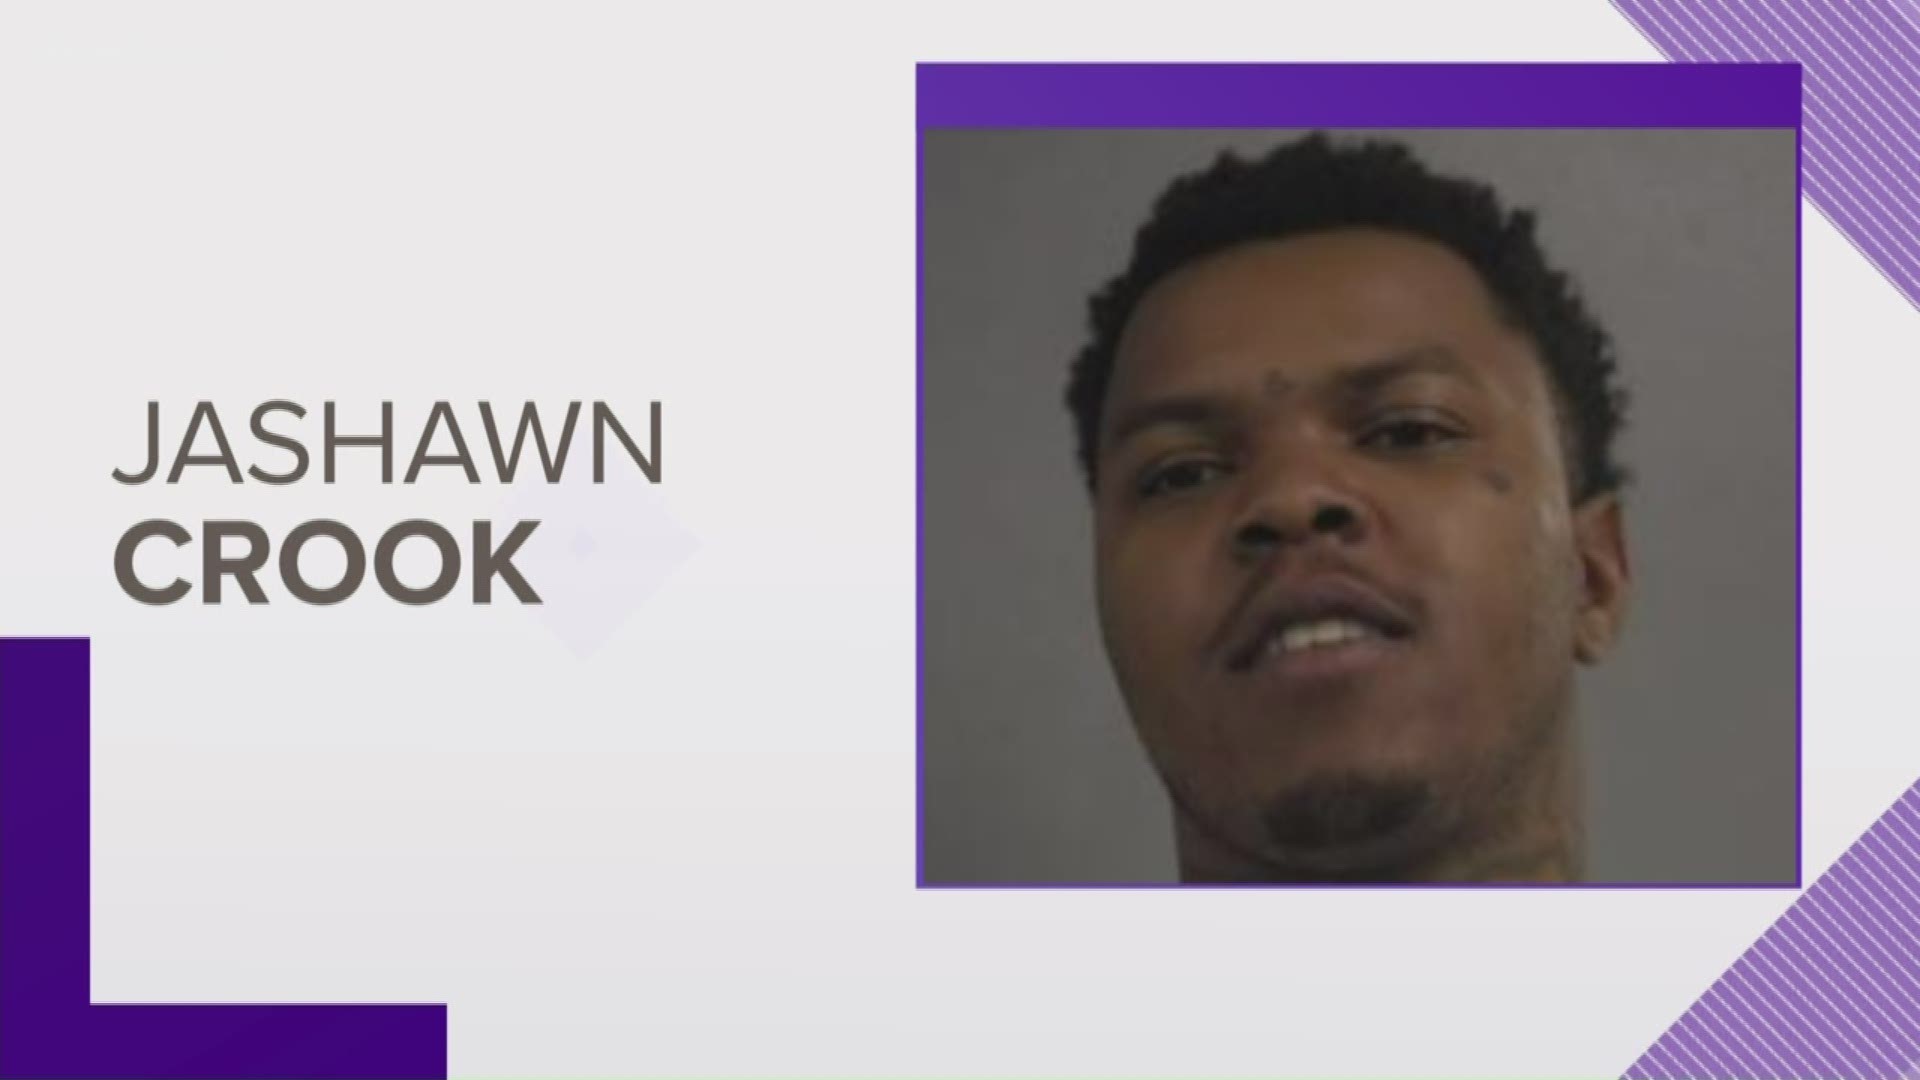 Police arrested Jashawn crook, after his ex-girlfriend accused him of assault, and threatening to kill her.